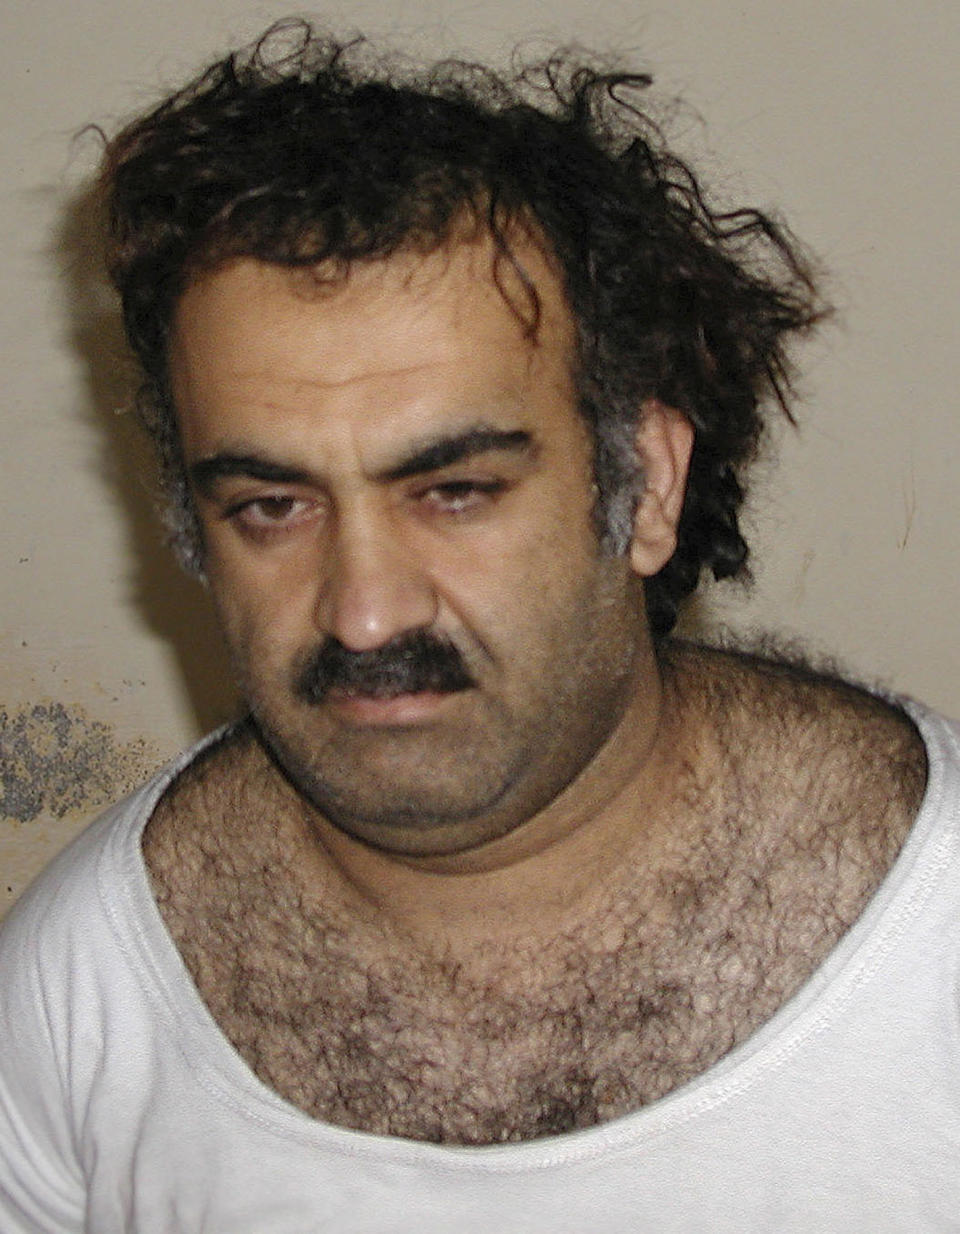 FILE -In this March 1, 2003 file photo, Khalid Sheikh Mohammed is seen shortly after his capture during a raid in Pakistan. Responding to an inquiry by Sulaiman Abu Ghaith’s attorney, the architect of the September 11, 2001, terrorist attacks on the United States still boasts that the Taliban was good for Afghanistan and a leader among Muslim-led governments plus everything Osama bin Laden said was right. Mohammed is being detained at Guantanamo Bay, Cuba and Abu Ghaith is being tried at Federal Court in New York for conspiring to kill Americans. (AP Photo, File)